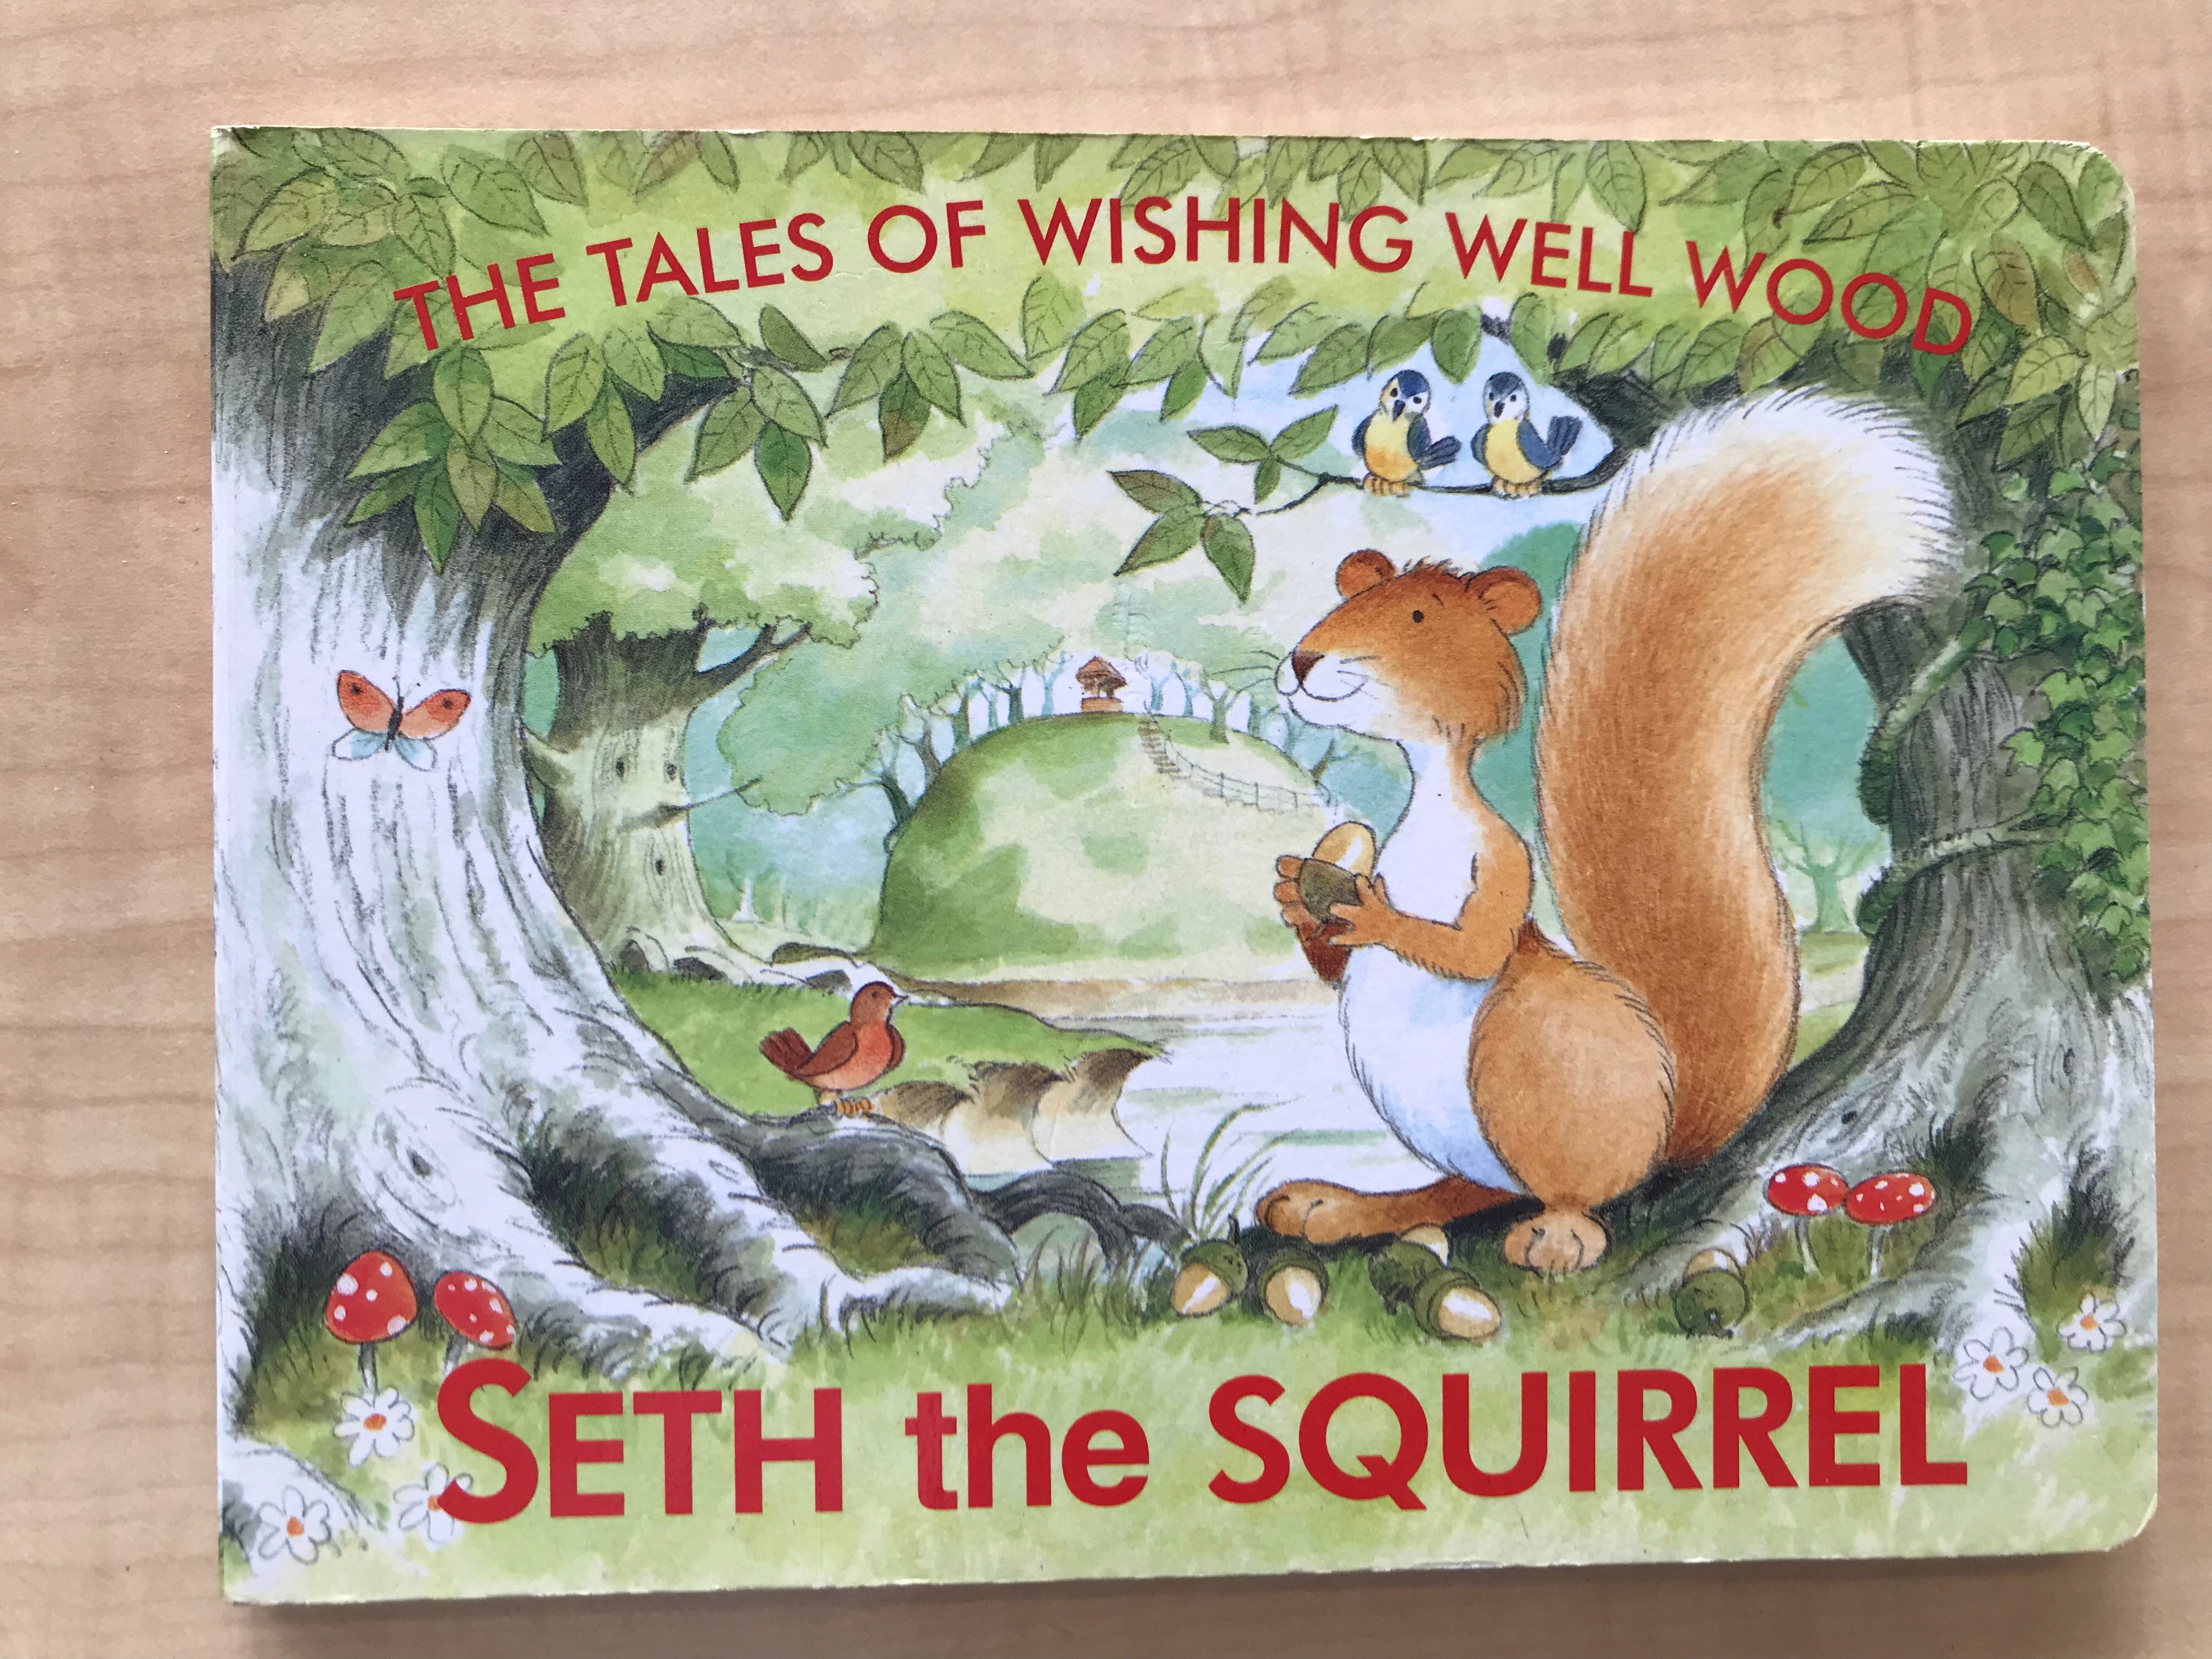 The Tales of the Wishing Well Wood - Seth the Squirrel